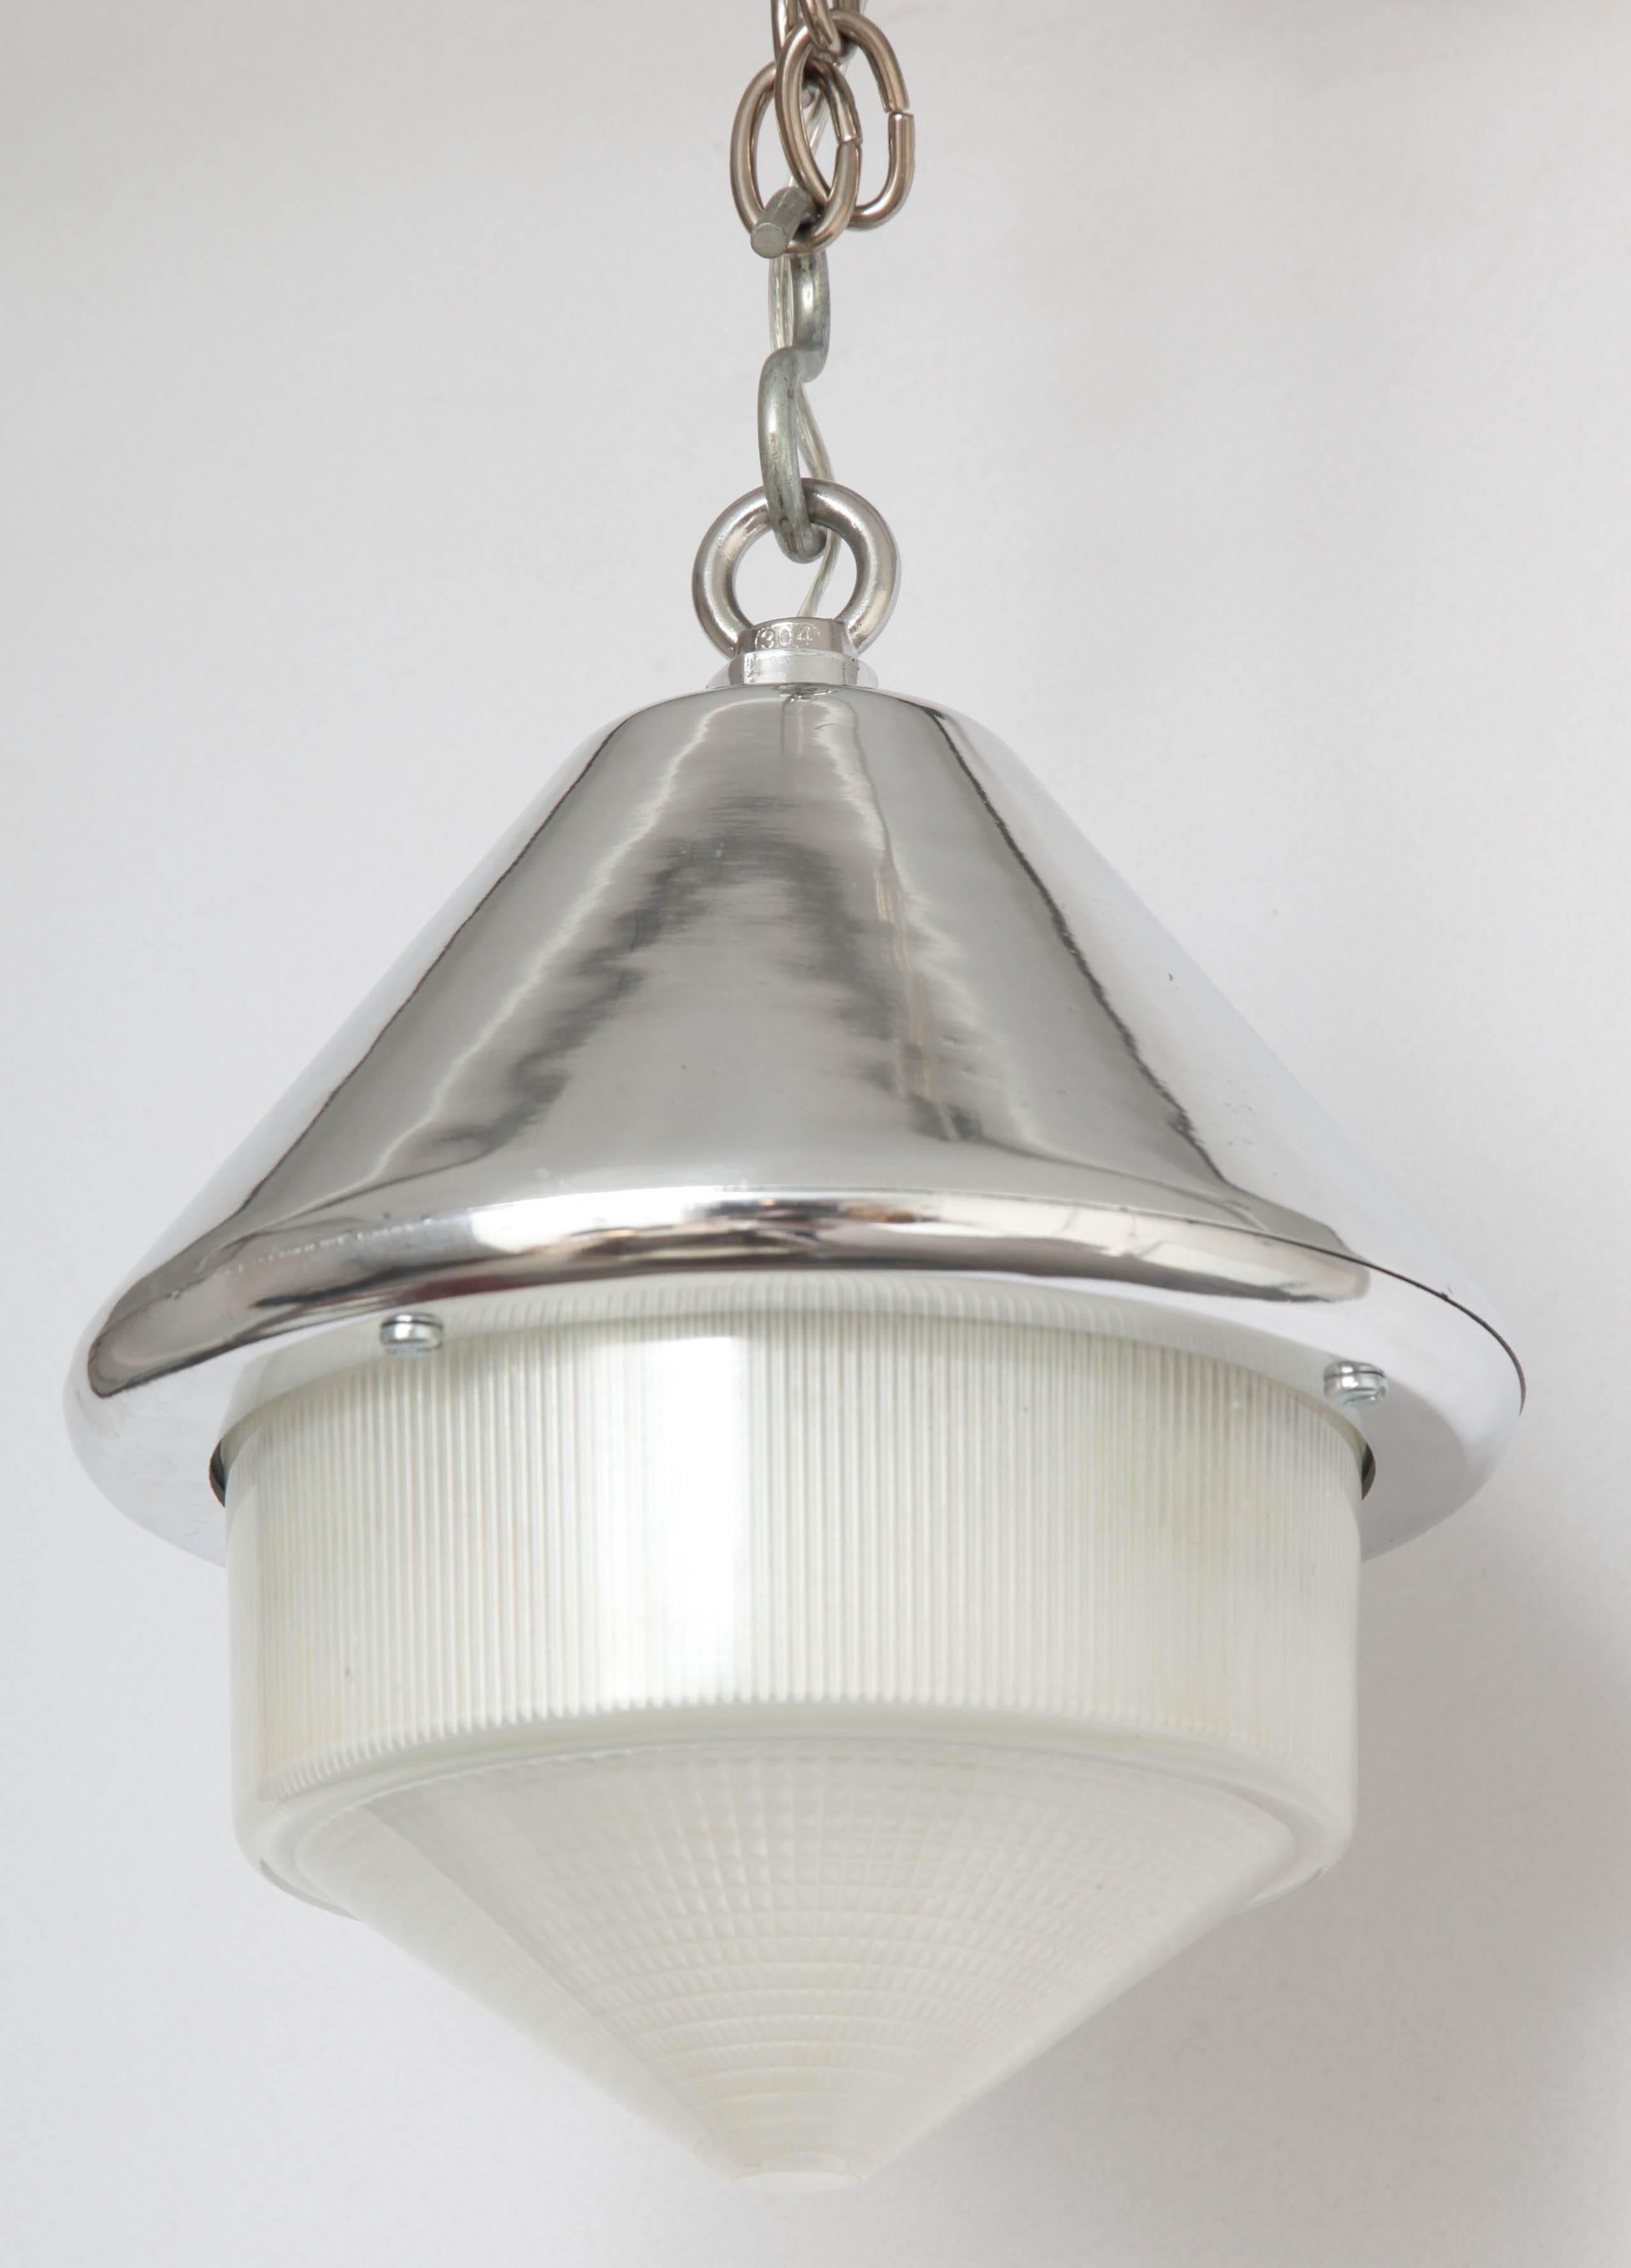 Amazing teardrop shape wartime pantry lights, made in the early 1940s.
 